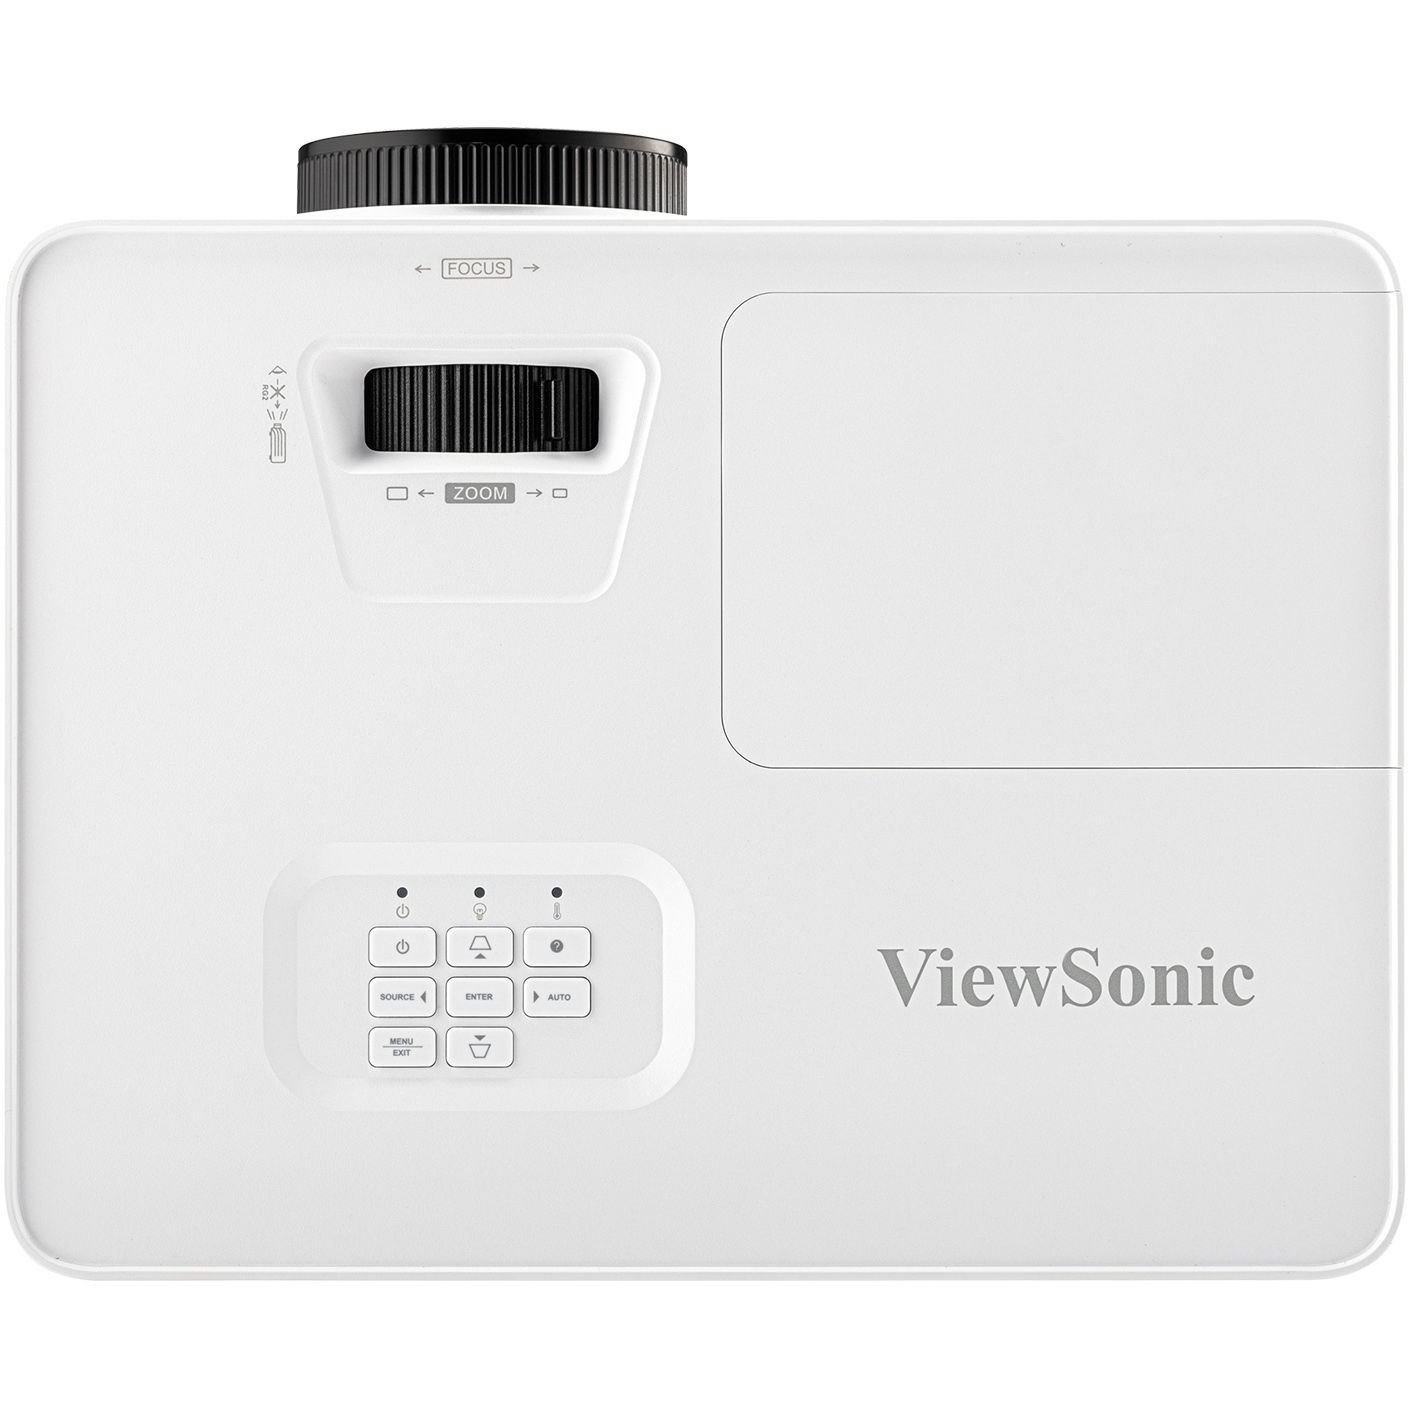 ViewSonic PA700W 4500 Lumens WXGA High Brightness Projector with Vertical Keystone for Business and Education